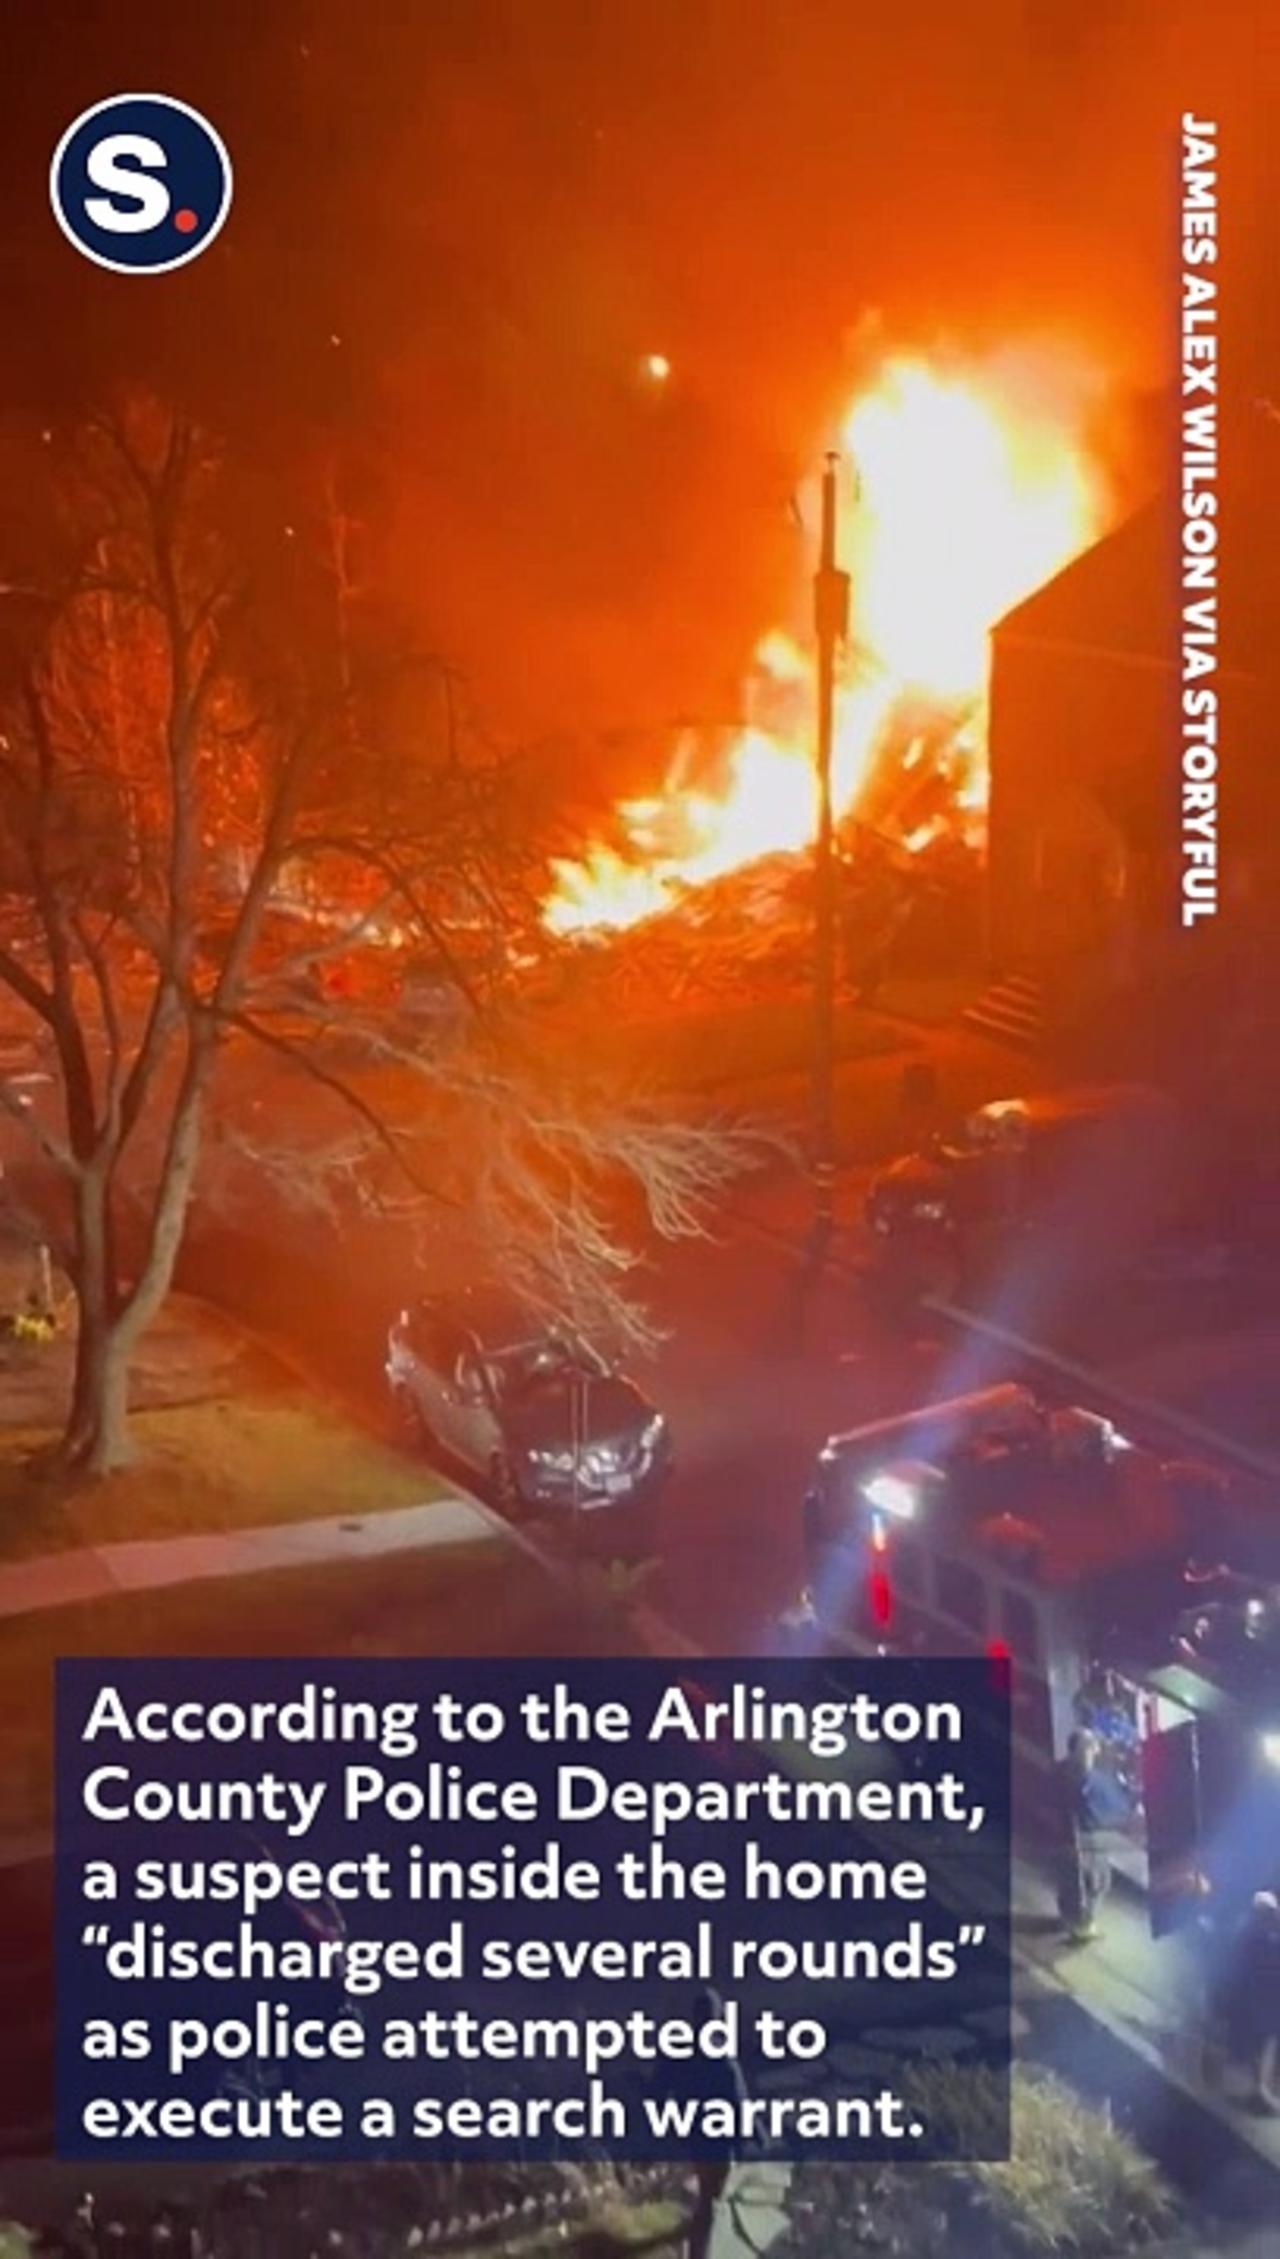 Arlington Home Explodes as Police Surround Armed Suspect